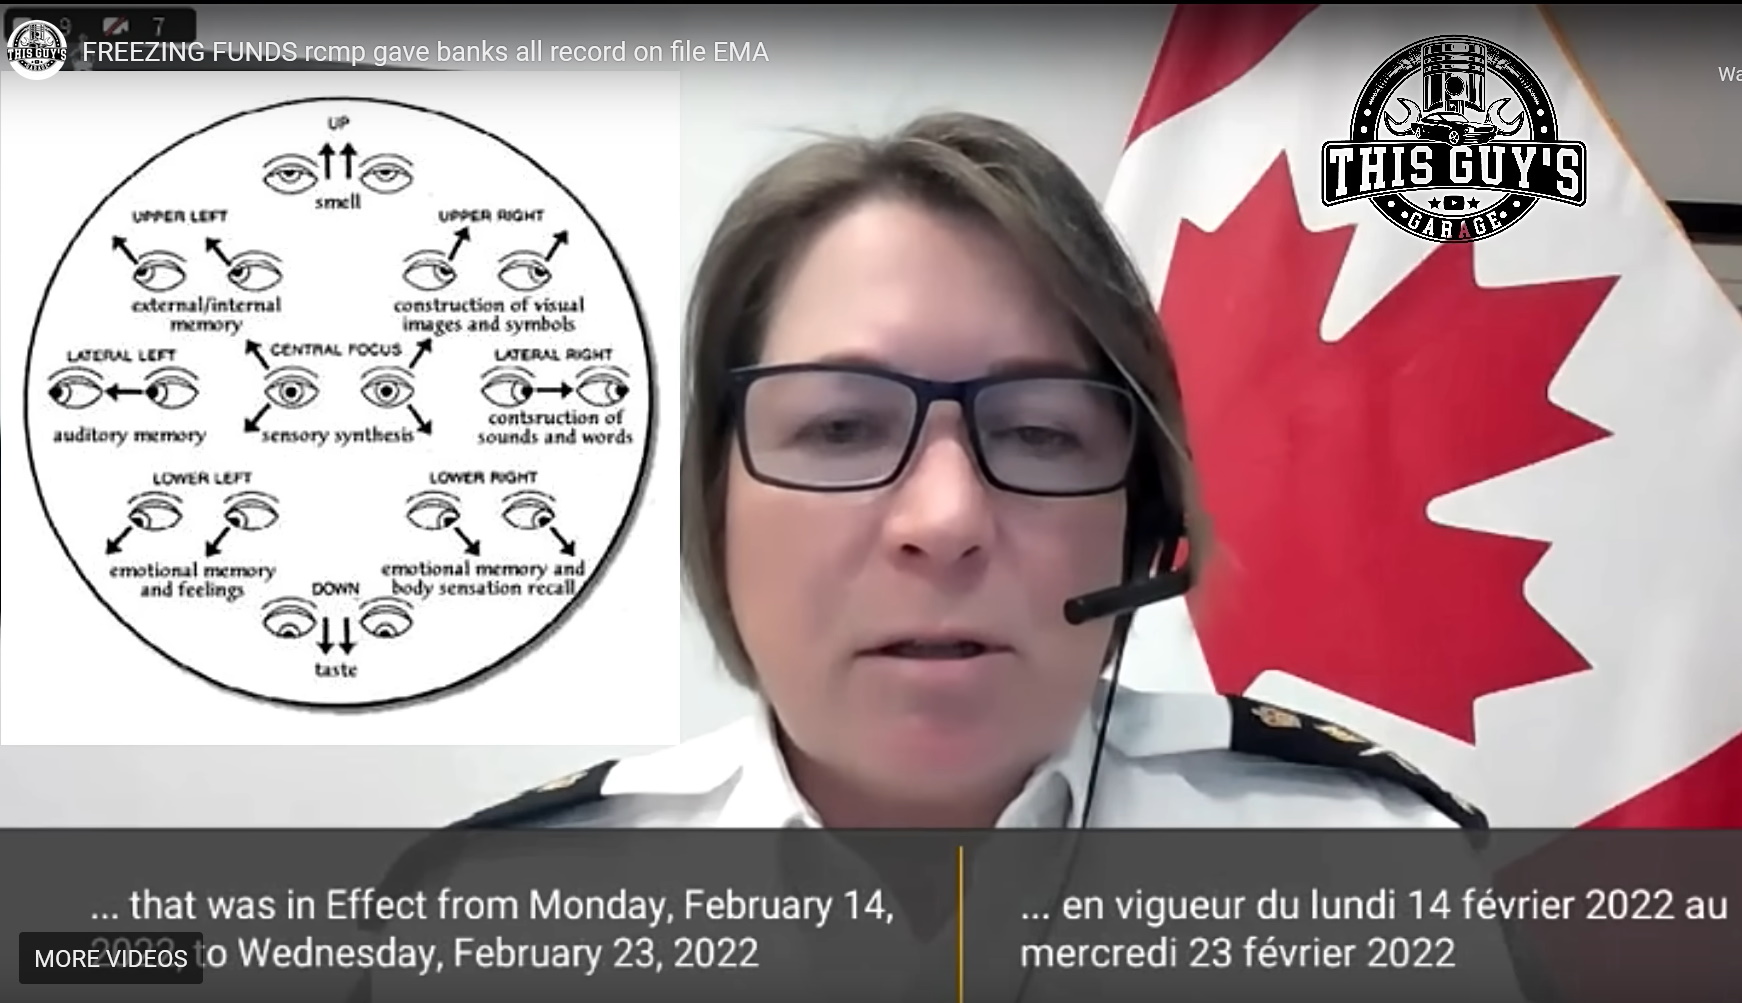 RCMP Brenda Lucki gets grilled over Freezing Bank Accounts & Actions at Protests